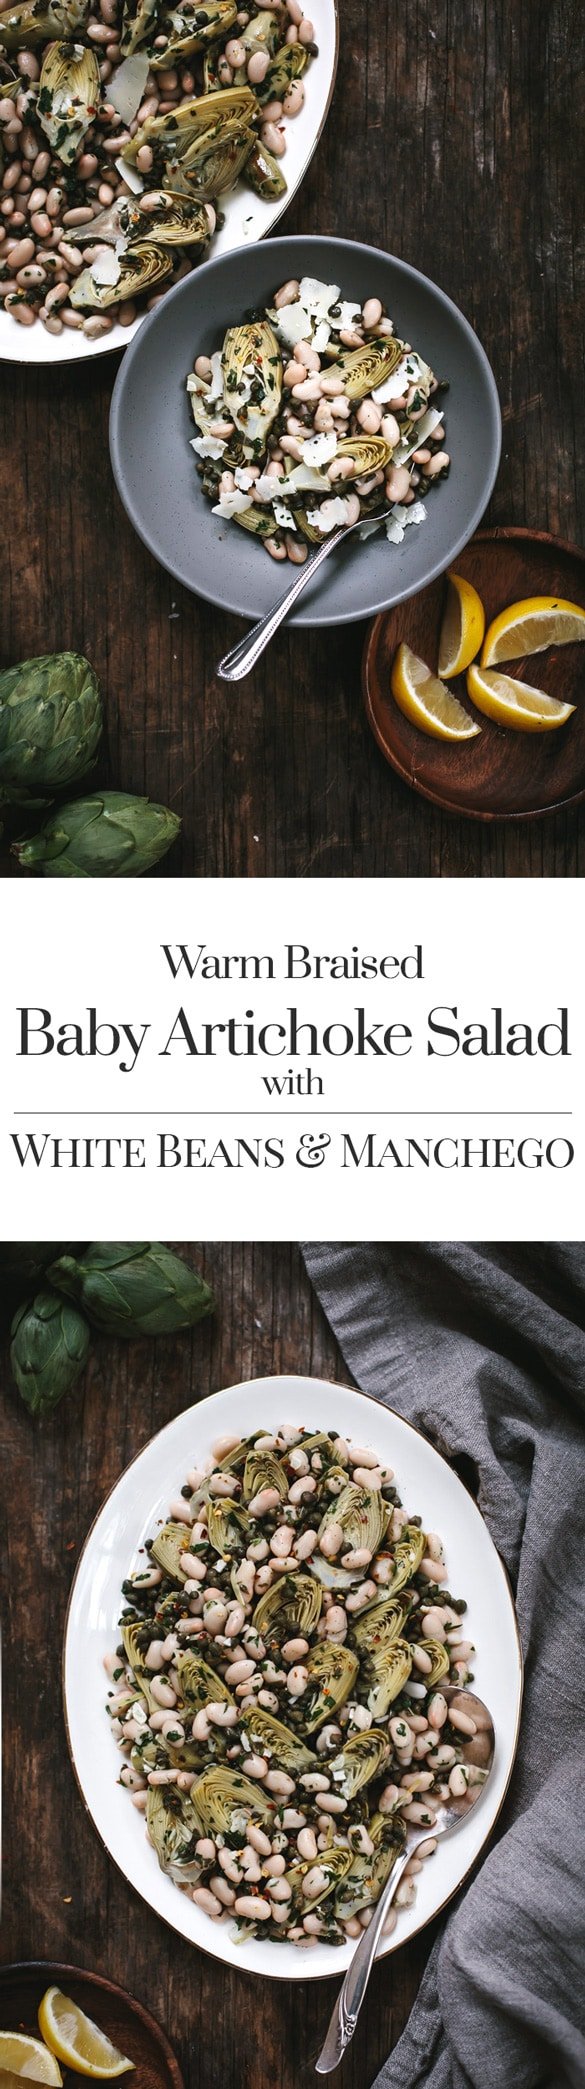 A bowl of Warm Braised Baby Artichoke Salad with White Beans and Manchego with cut lemons and artichokes